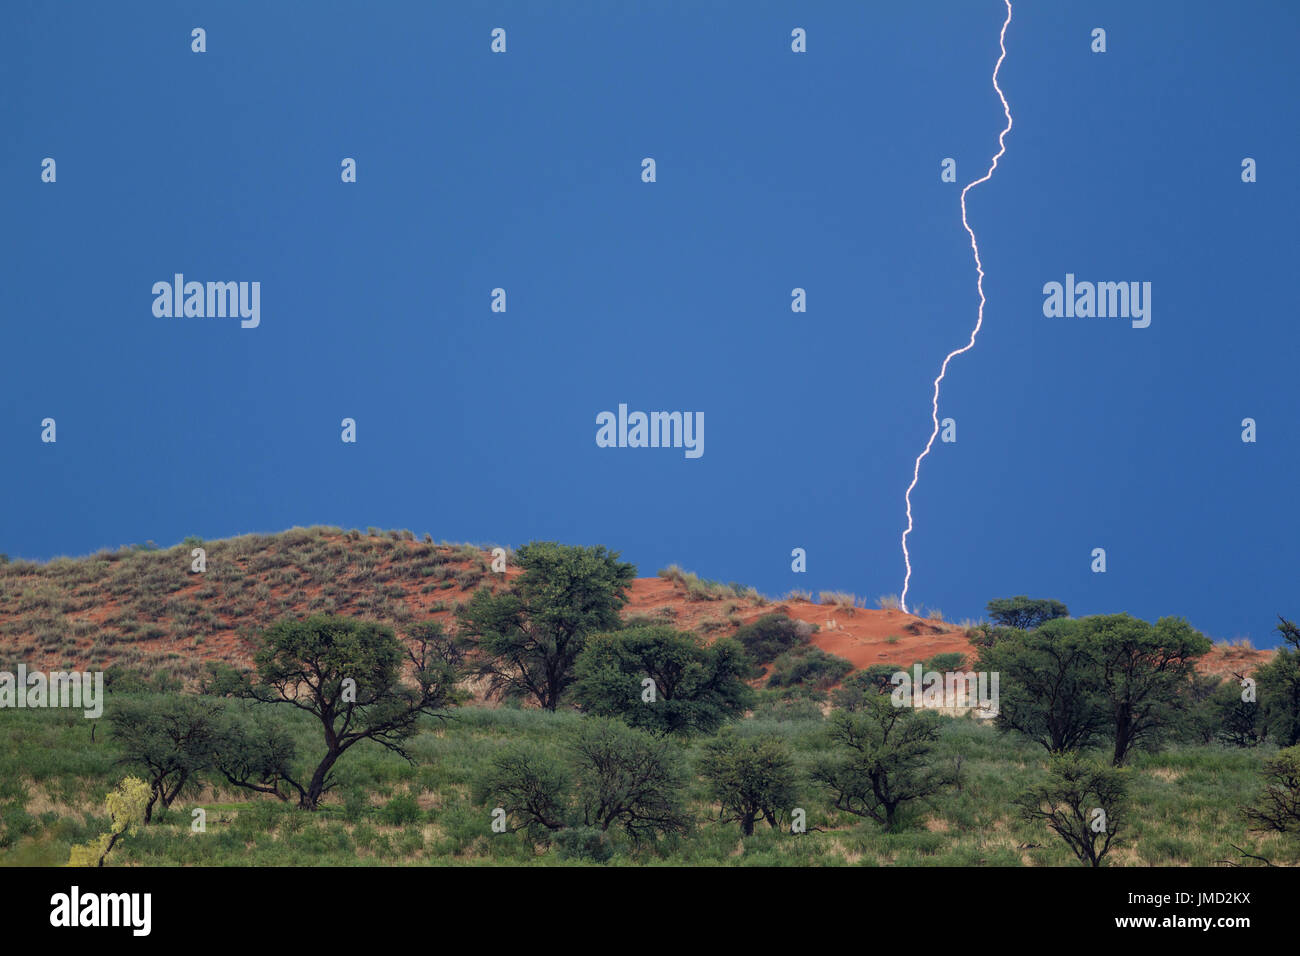 Grass-grown sand dune and Camelthorn trees (Acacia erioloba) in the Kalahari Desert. In January during the rainy season with thunderstorm and lightning. Stock Photo